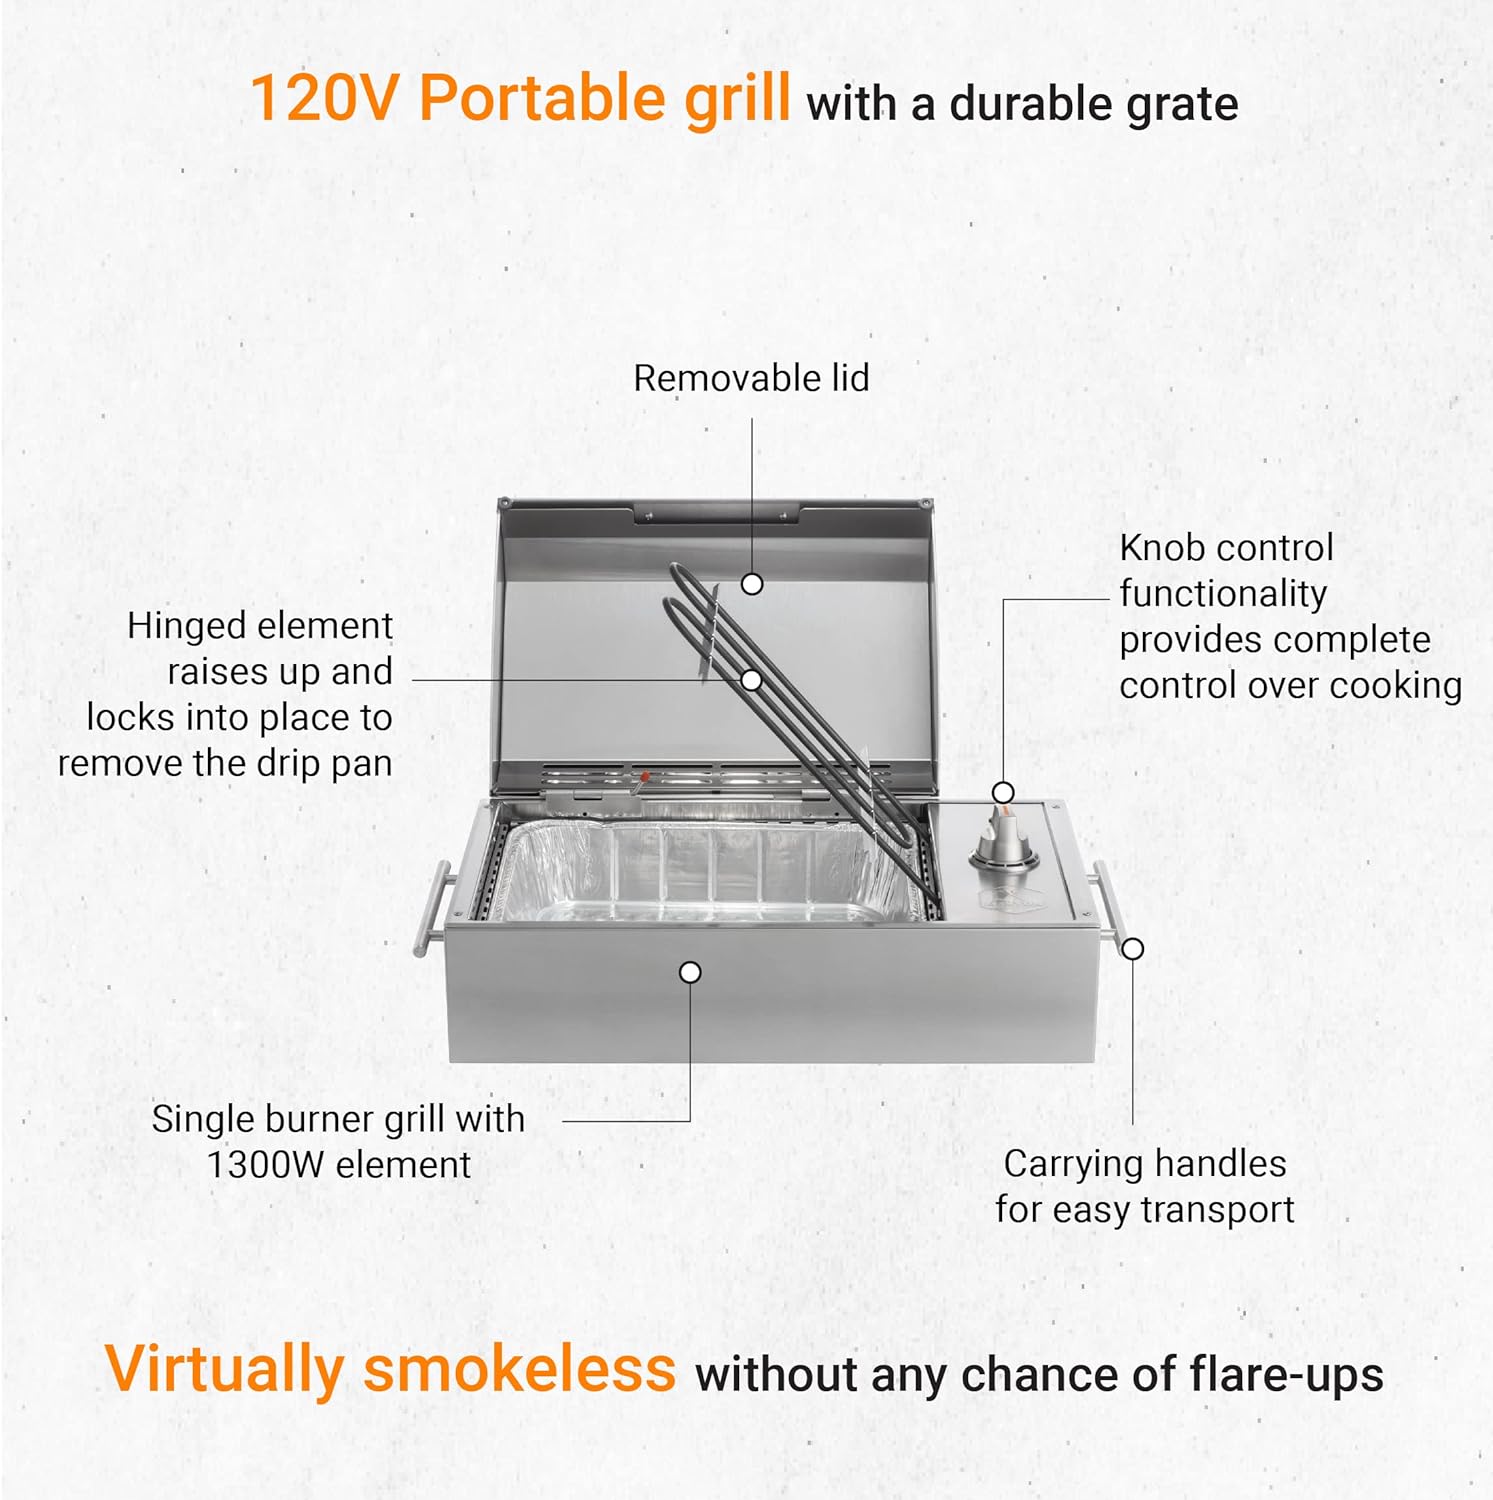 Kenyon B70200 City Grill, Portable Grill, Stainless Steel, Single Burner, Knob Control, Faceted Lid, UL Approved For Use Indoors And Outdoors, Flame-Free, 120V - Kenyon B70200 City Grill Review